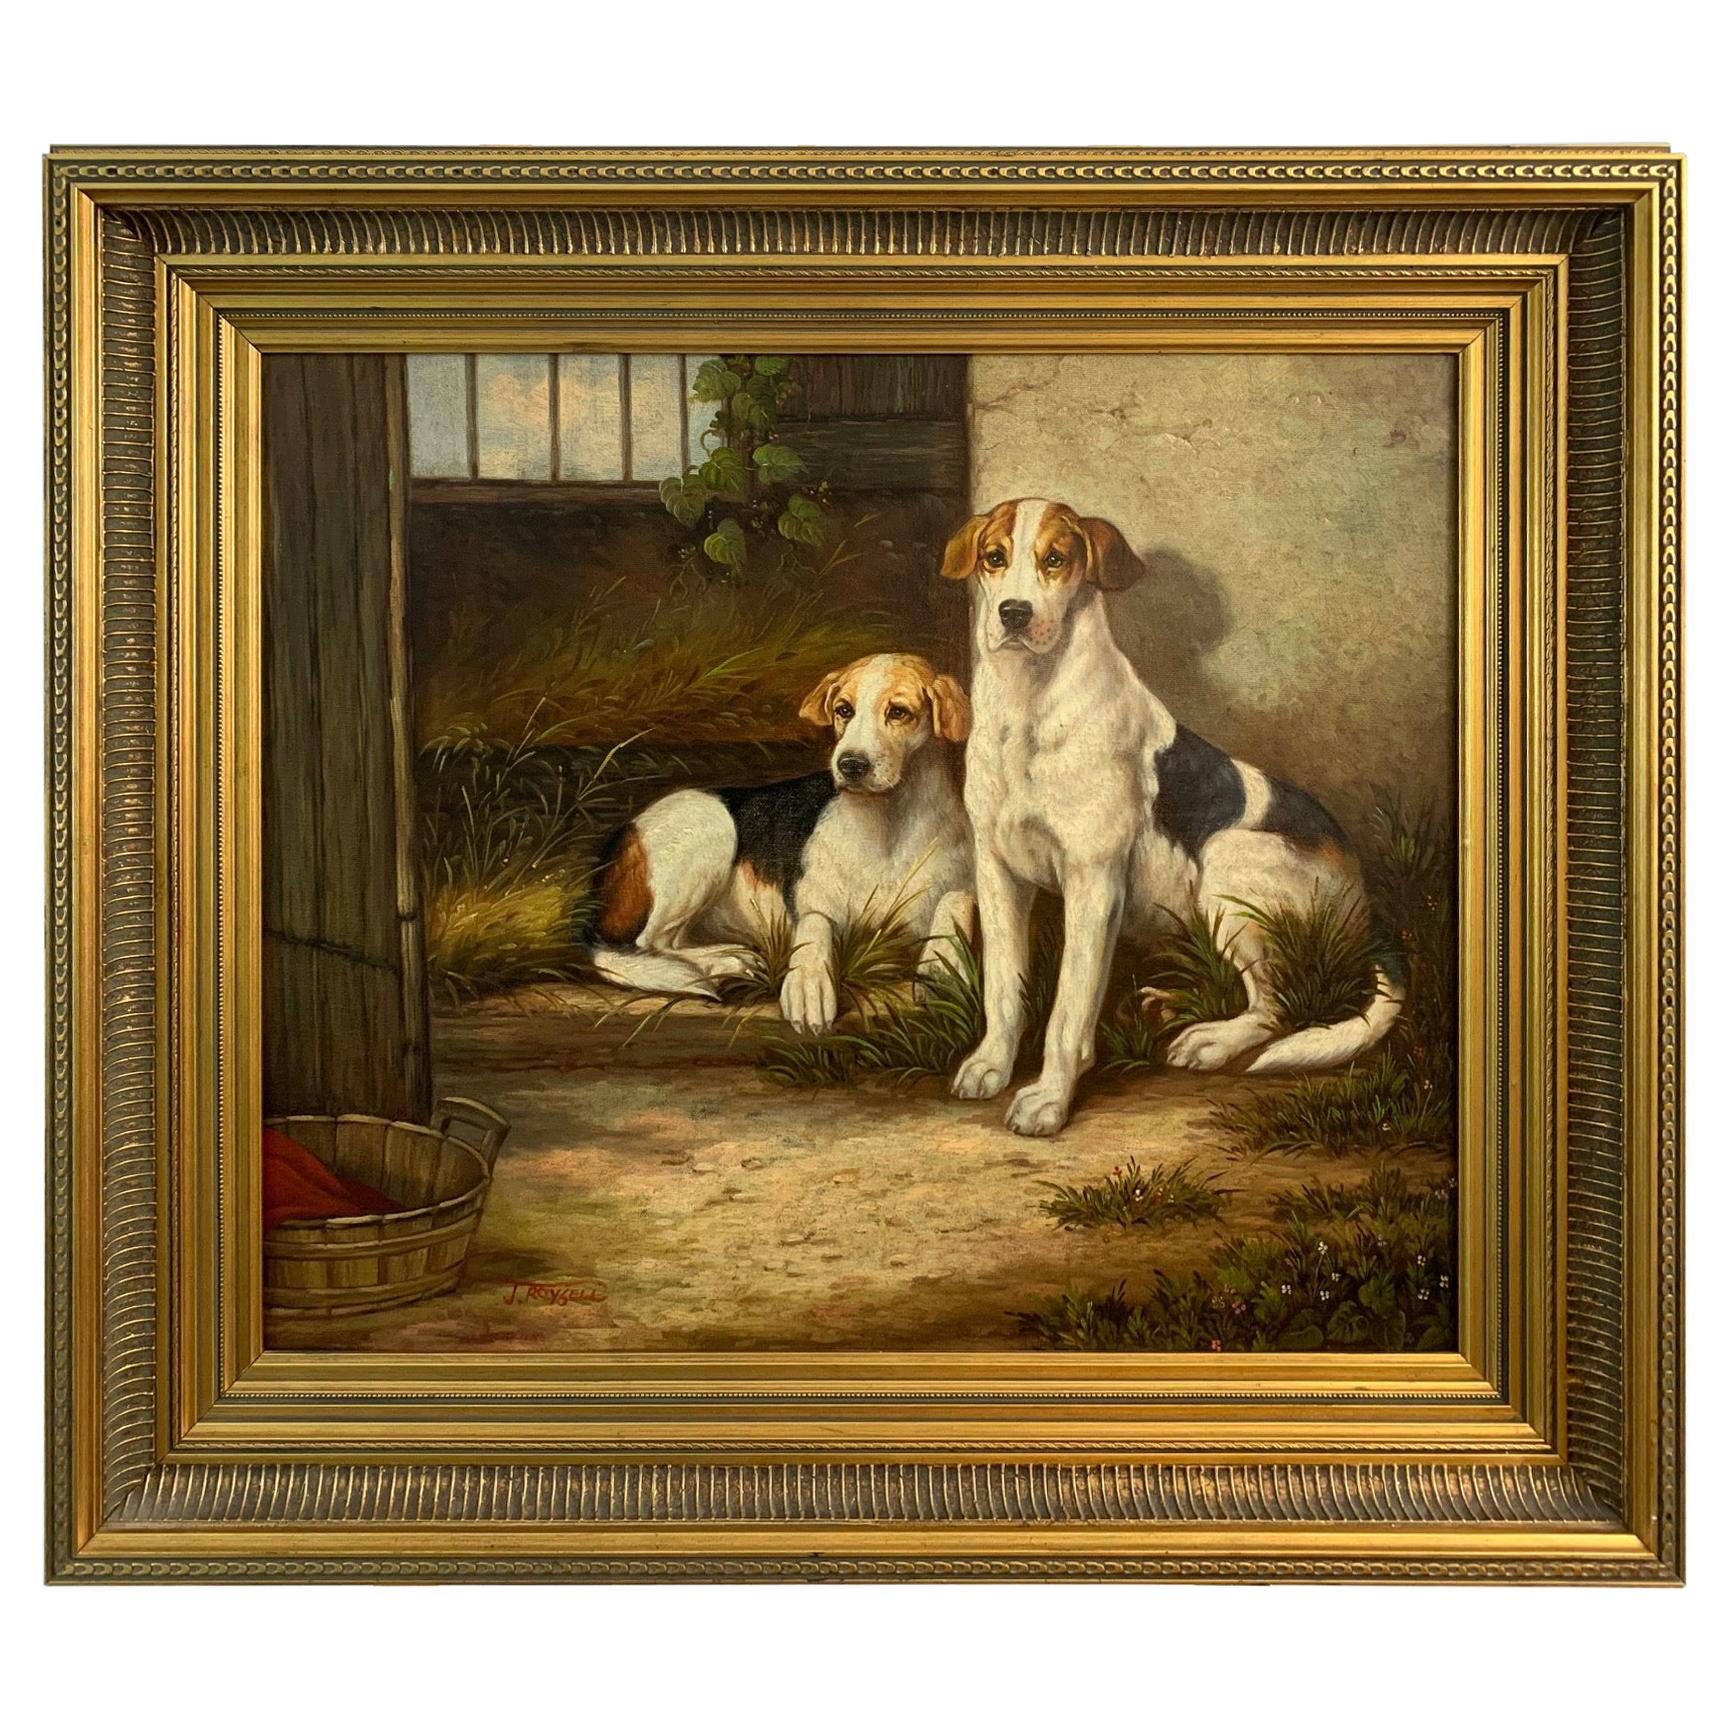 Charming Original Oil Painting of Two Loyal Dog